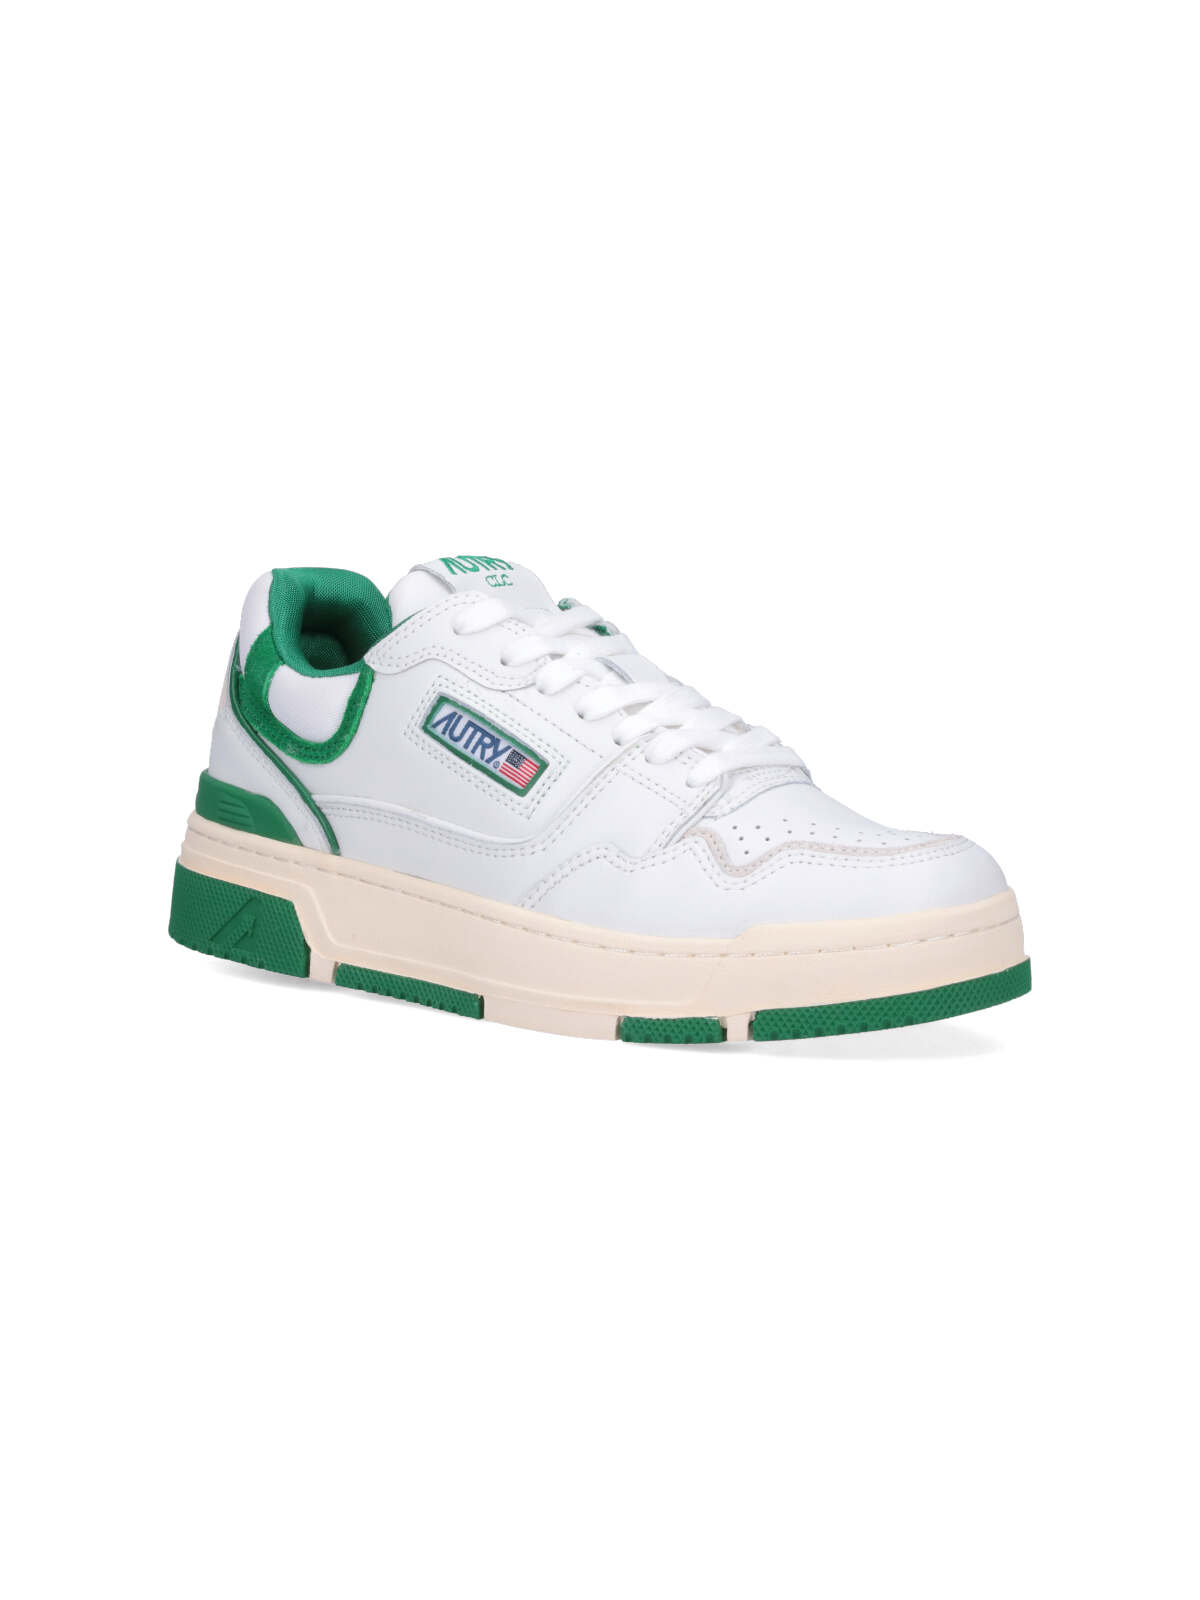 Shop Autry Clc Sneakers In White, Green